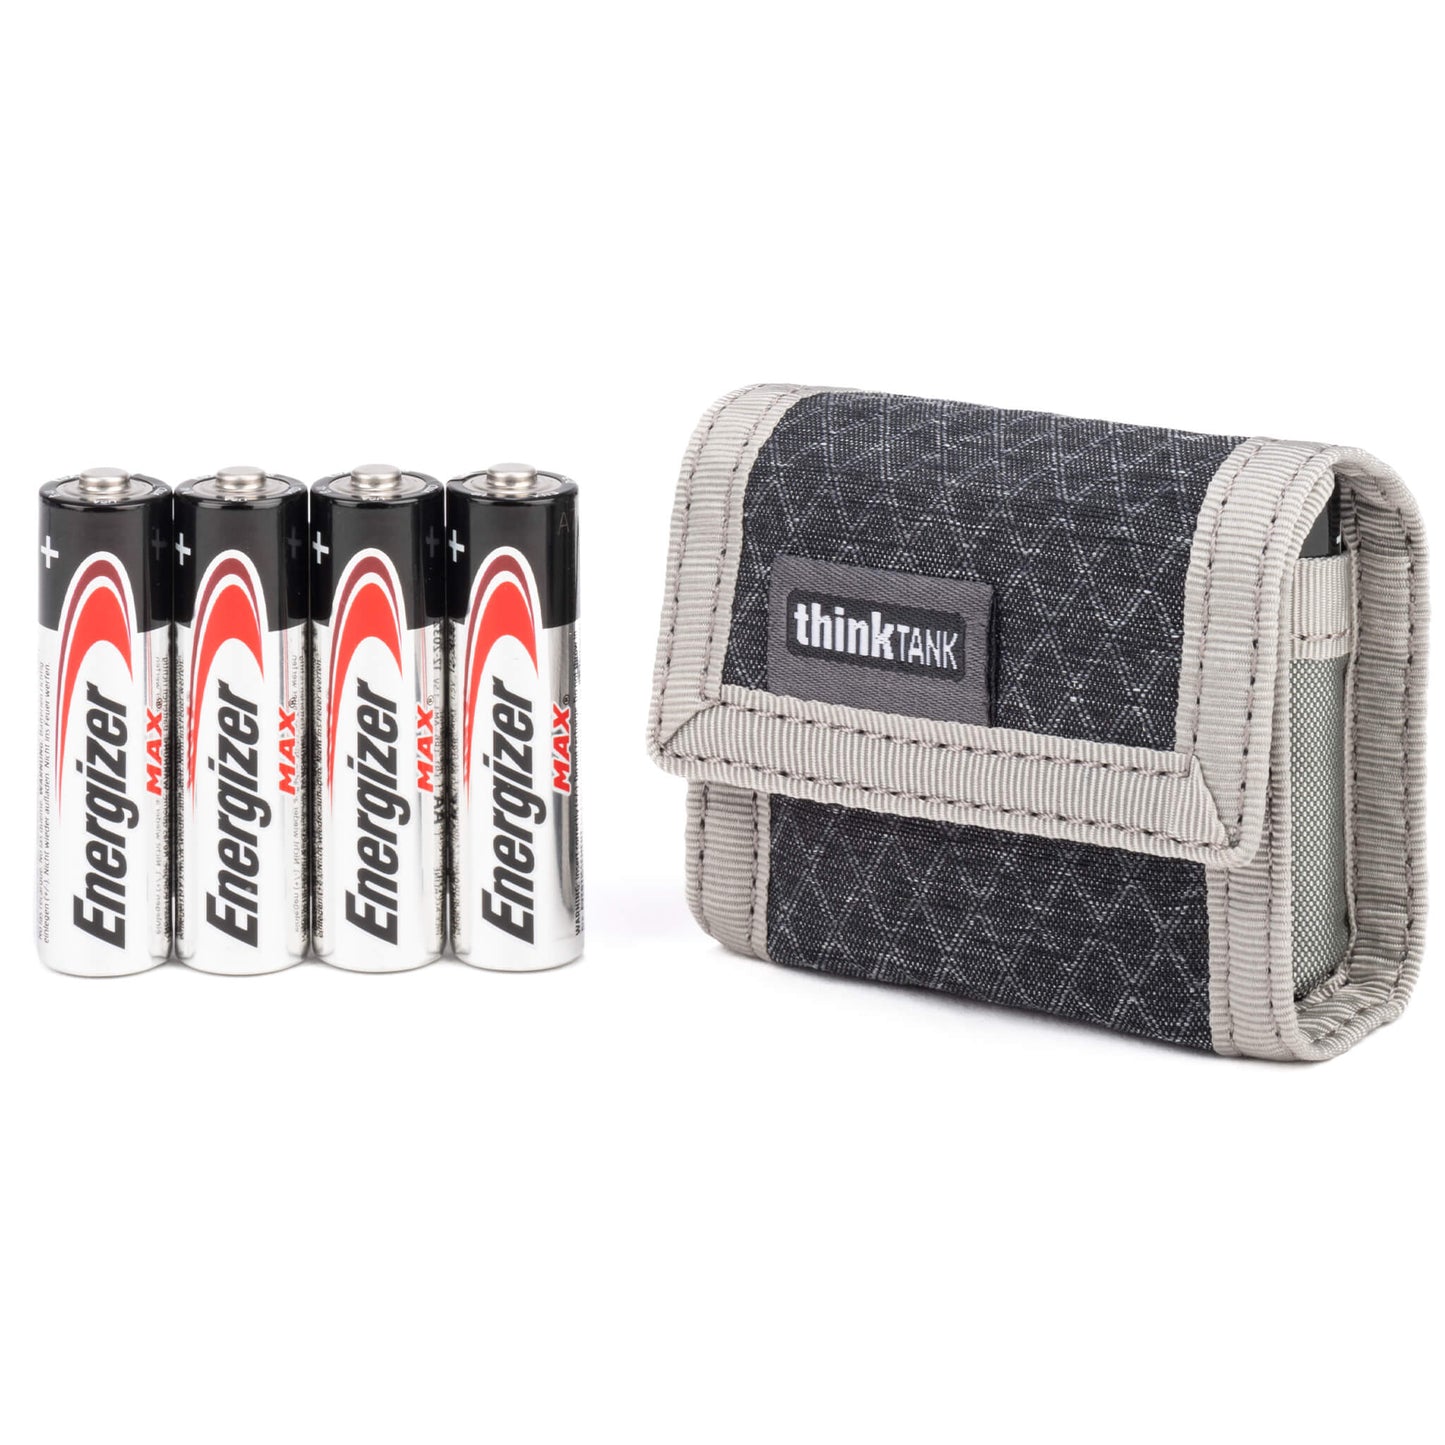 AA Battery Holder Soft, compact case for carrying 8 AA or 16 AAA batteries.